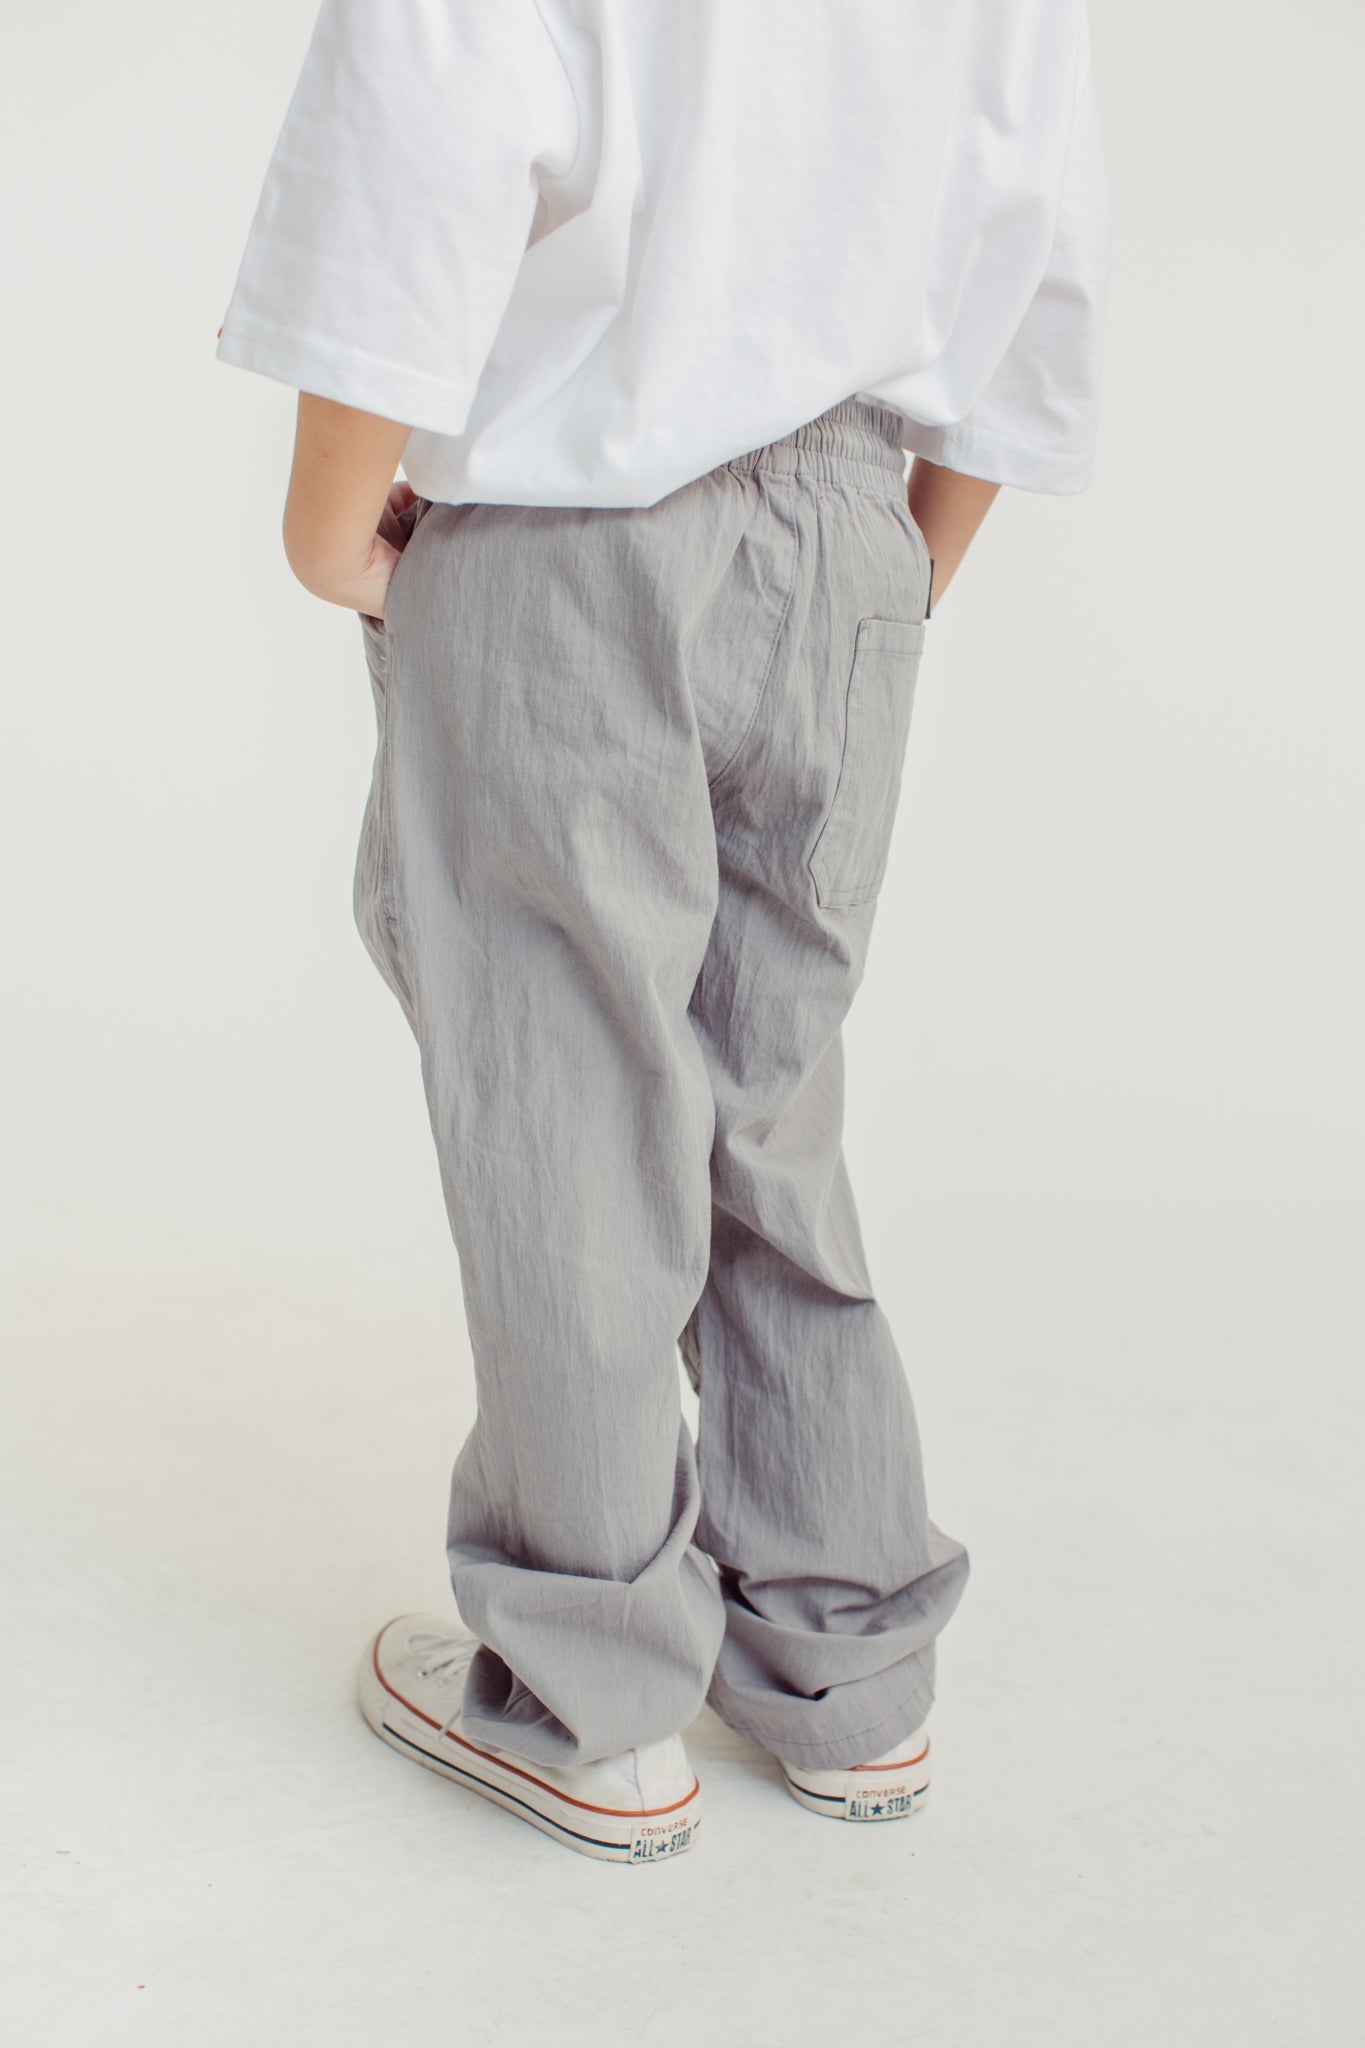 Gray Pull on Trousers with Shaping Darts and drawstring Kids Boys - Mossimo PH